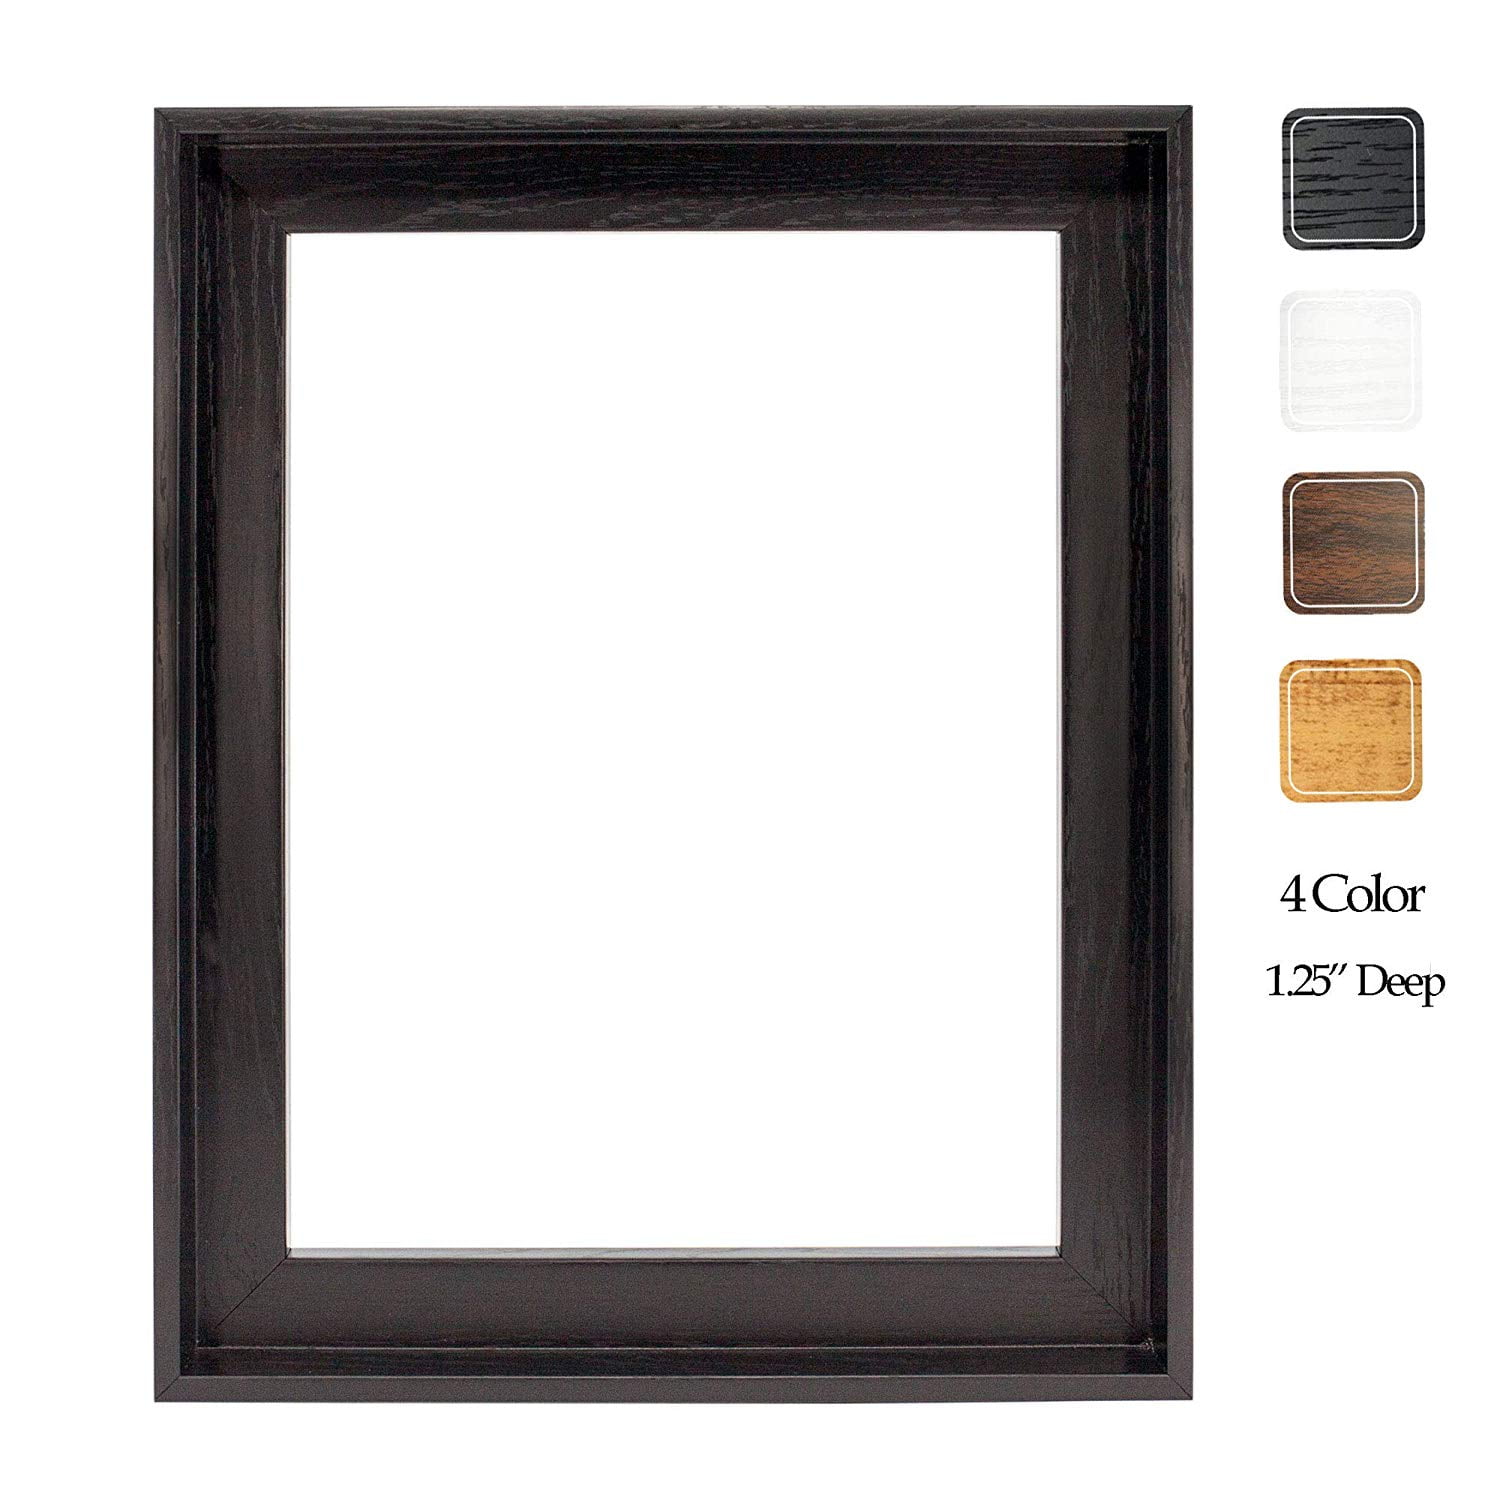 Frame Company Allington Range Picture Photo Frame with White Mount for Image Size 12 x 8 Inches 14 x 11 Inches Black